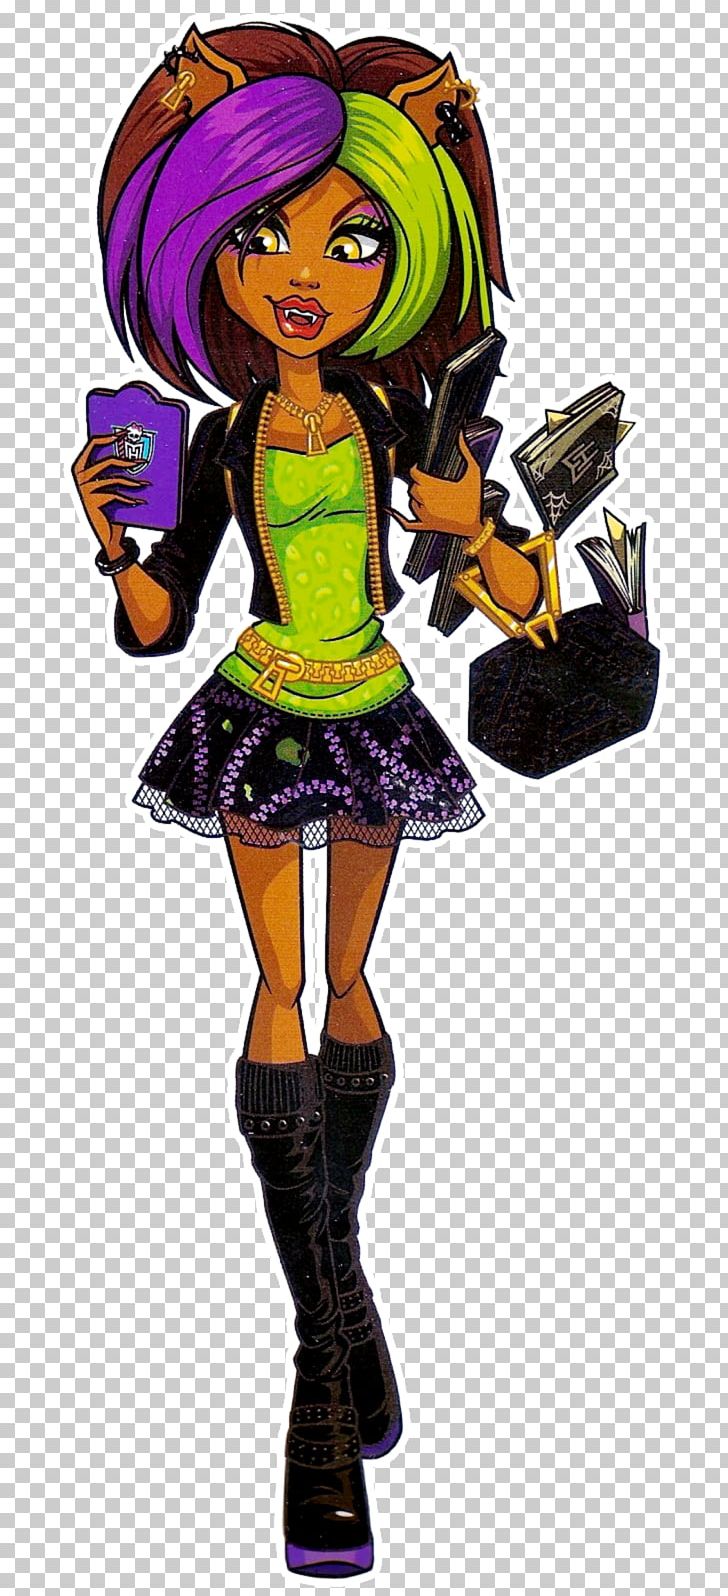 Monster High Clawdeen Wolf Doll Frankie Stein Monster High Original Gouls CollectionClawdeen Wolf Doll PNG, Clipart, Bratz, Cla, Clothing, Costume, Enchantimals Free PNG Download